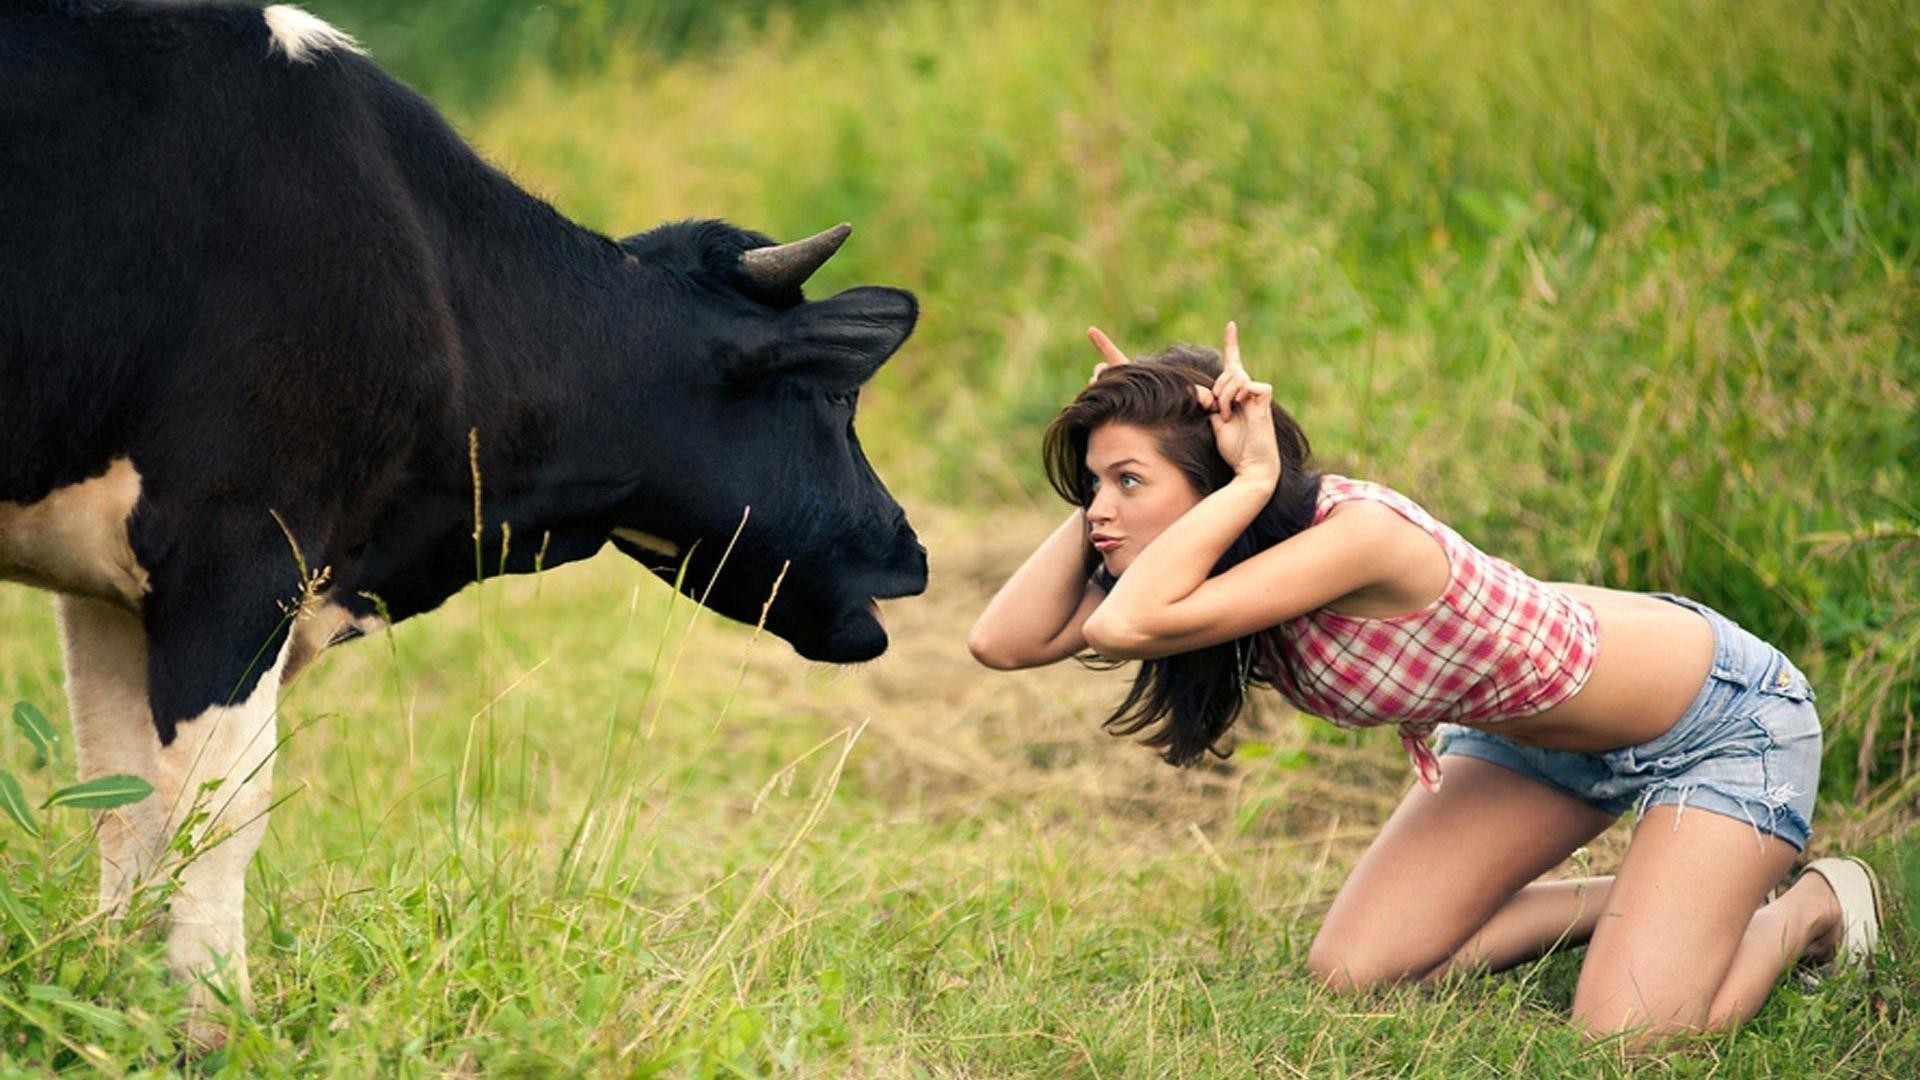 1920x1080 Funny Hot Girl Cow Images HD Wallpapers